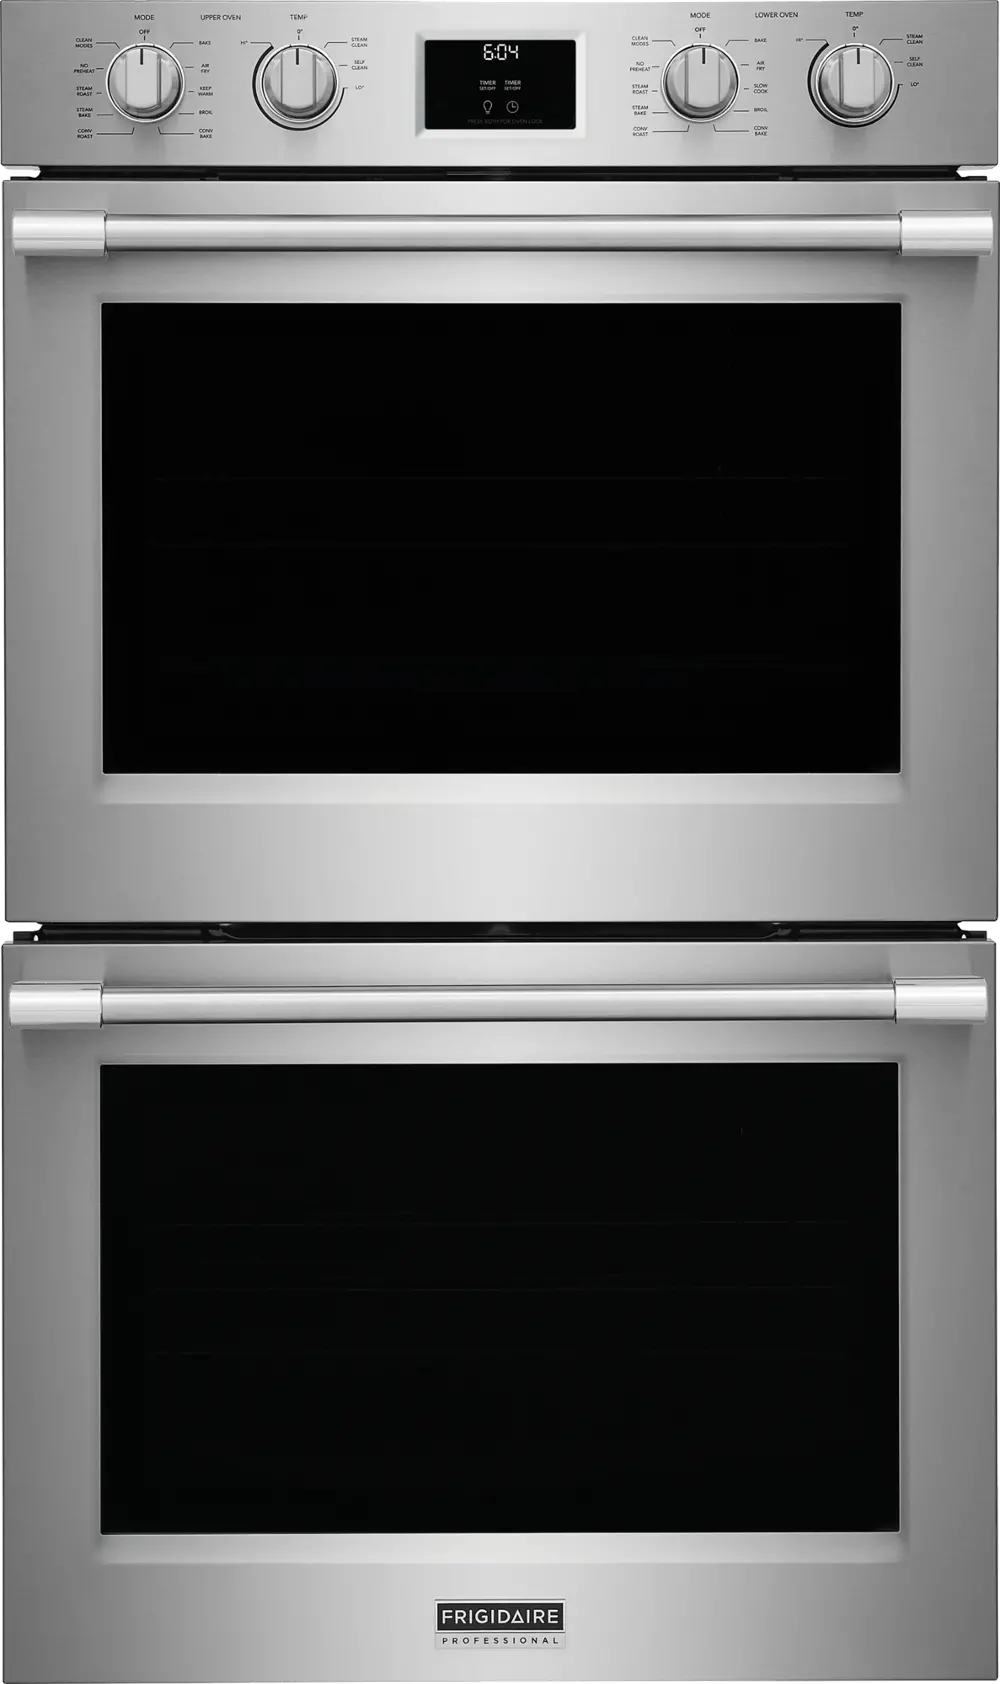 PCWD3080AF Frigidaire Professional 10.6 cu ft Double Wall Oven - Stainless Steel 30 Inch-1